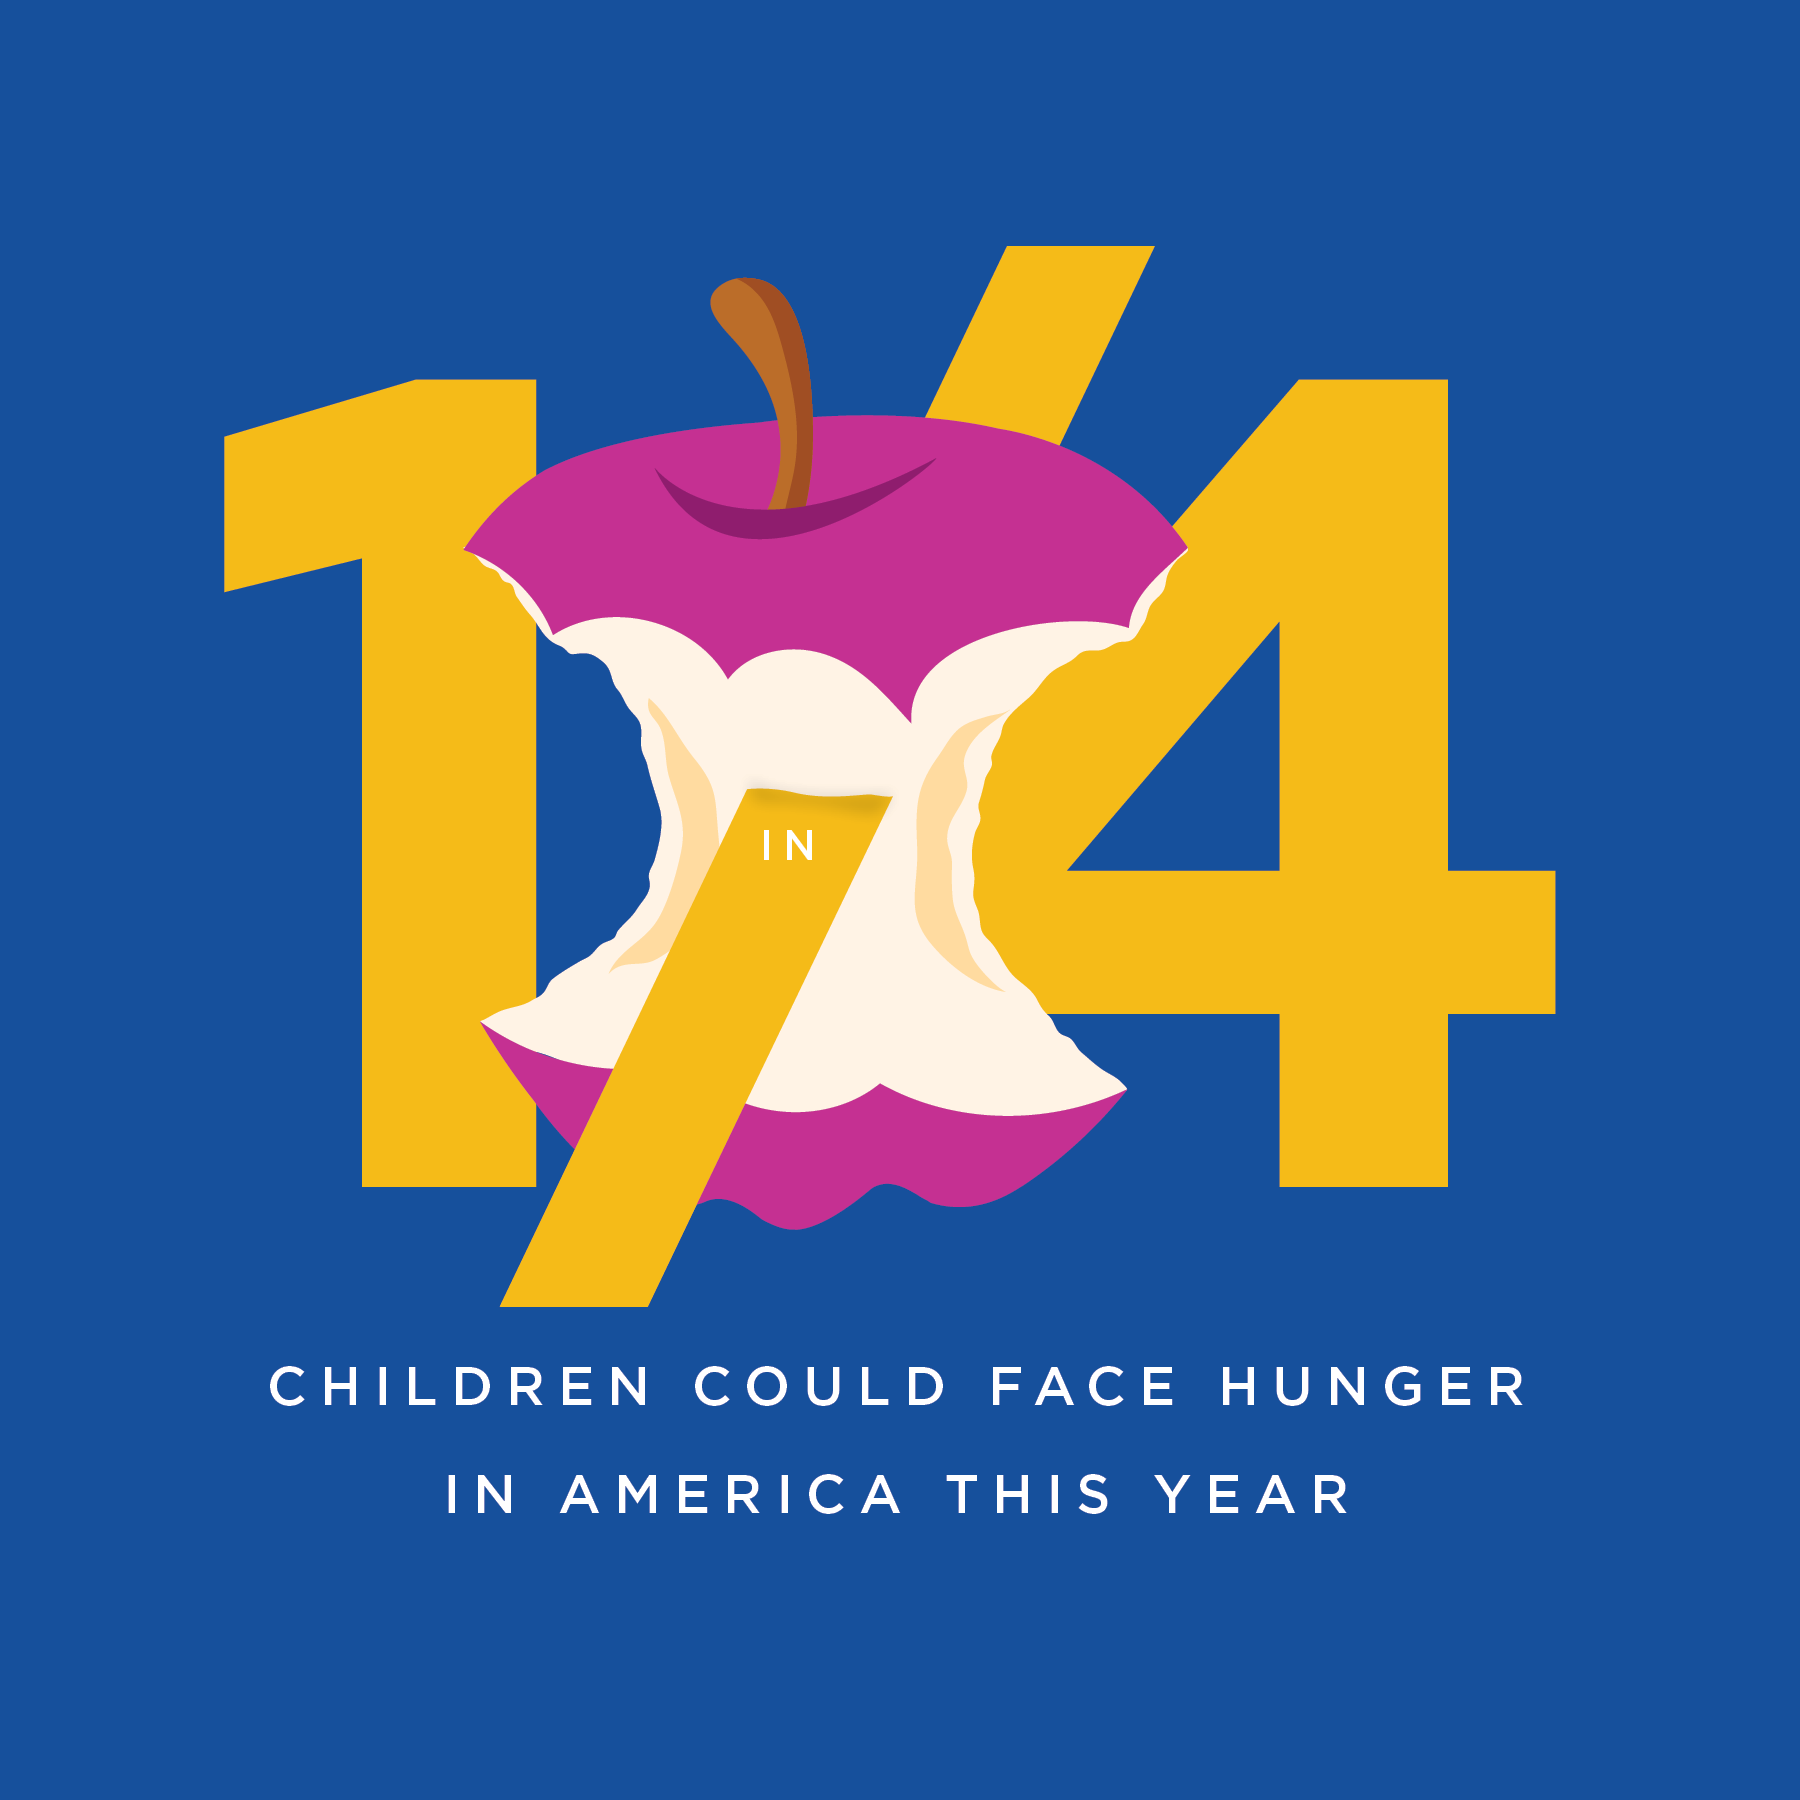 1 in 4 children could face hunger